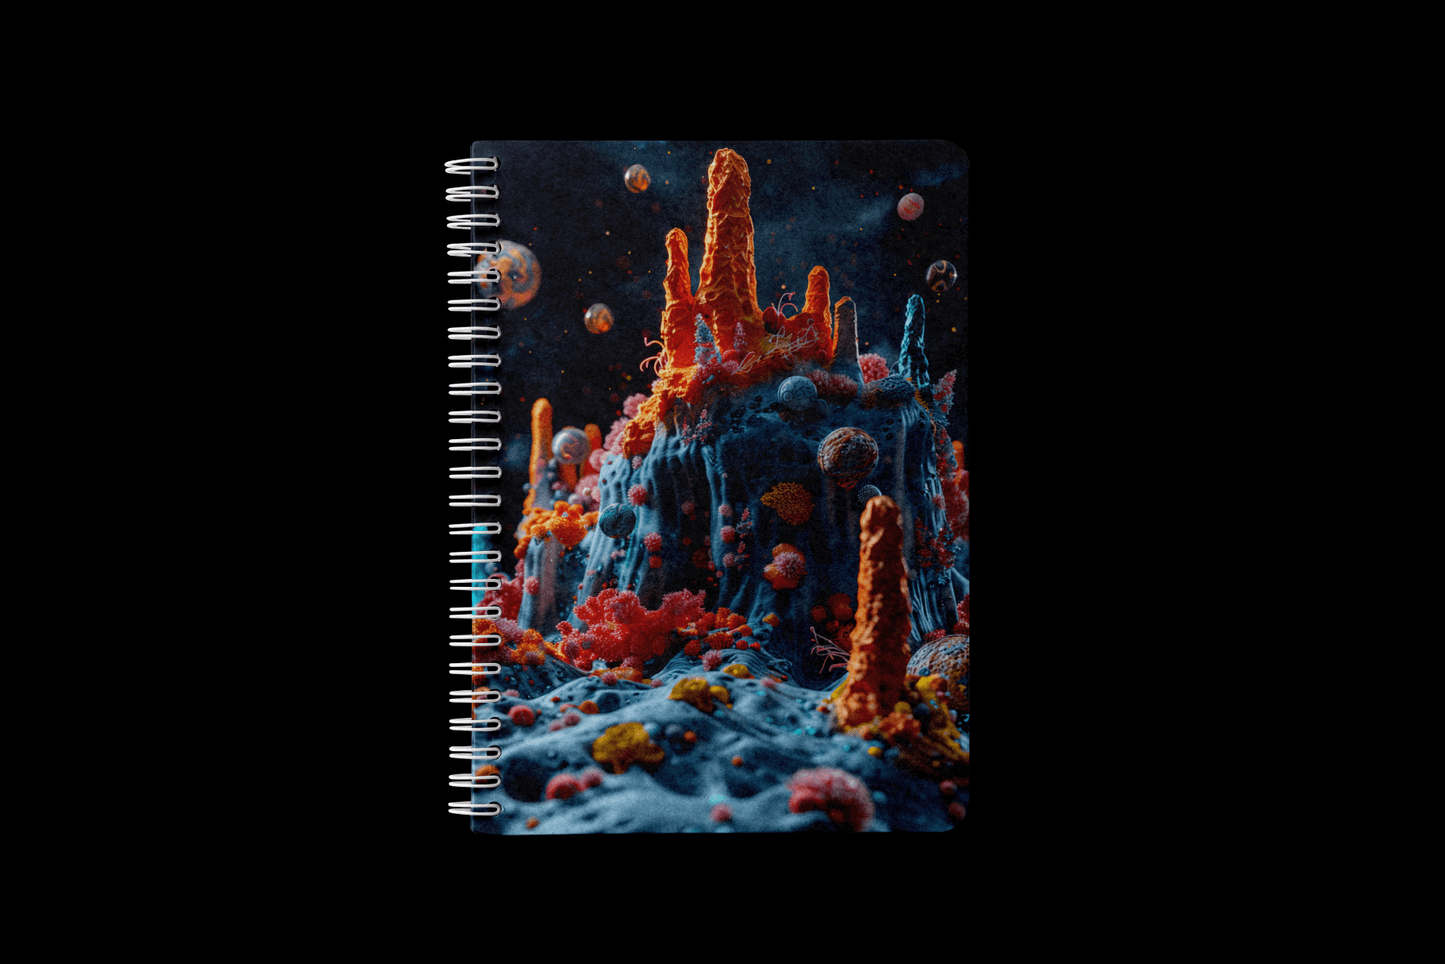 Notebook cover of extraterrestrial planet terrain